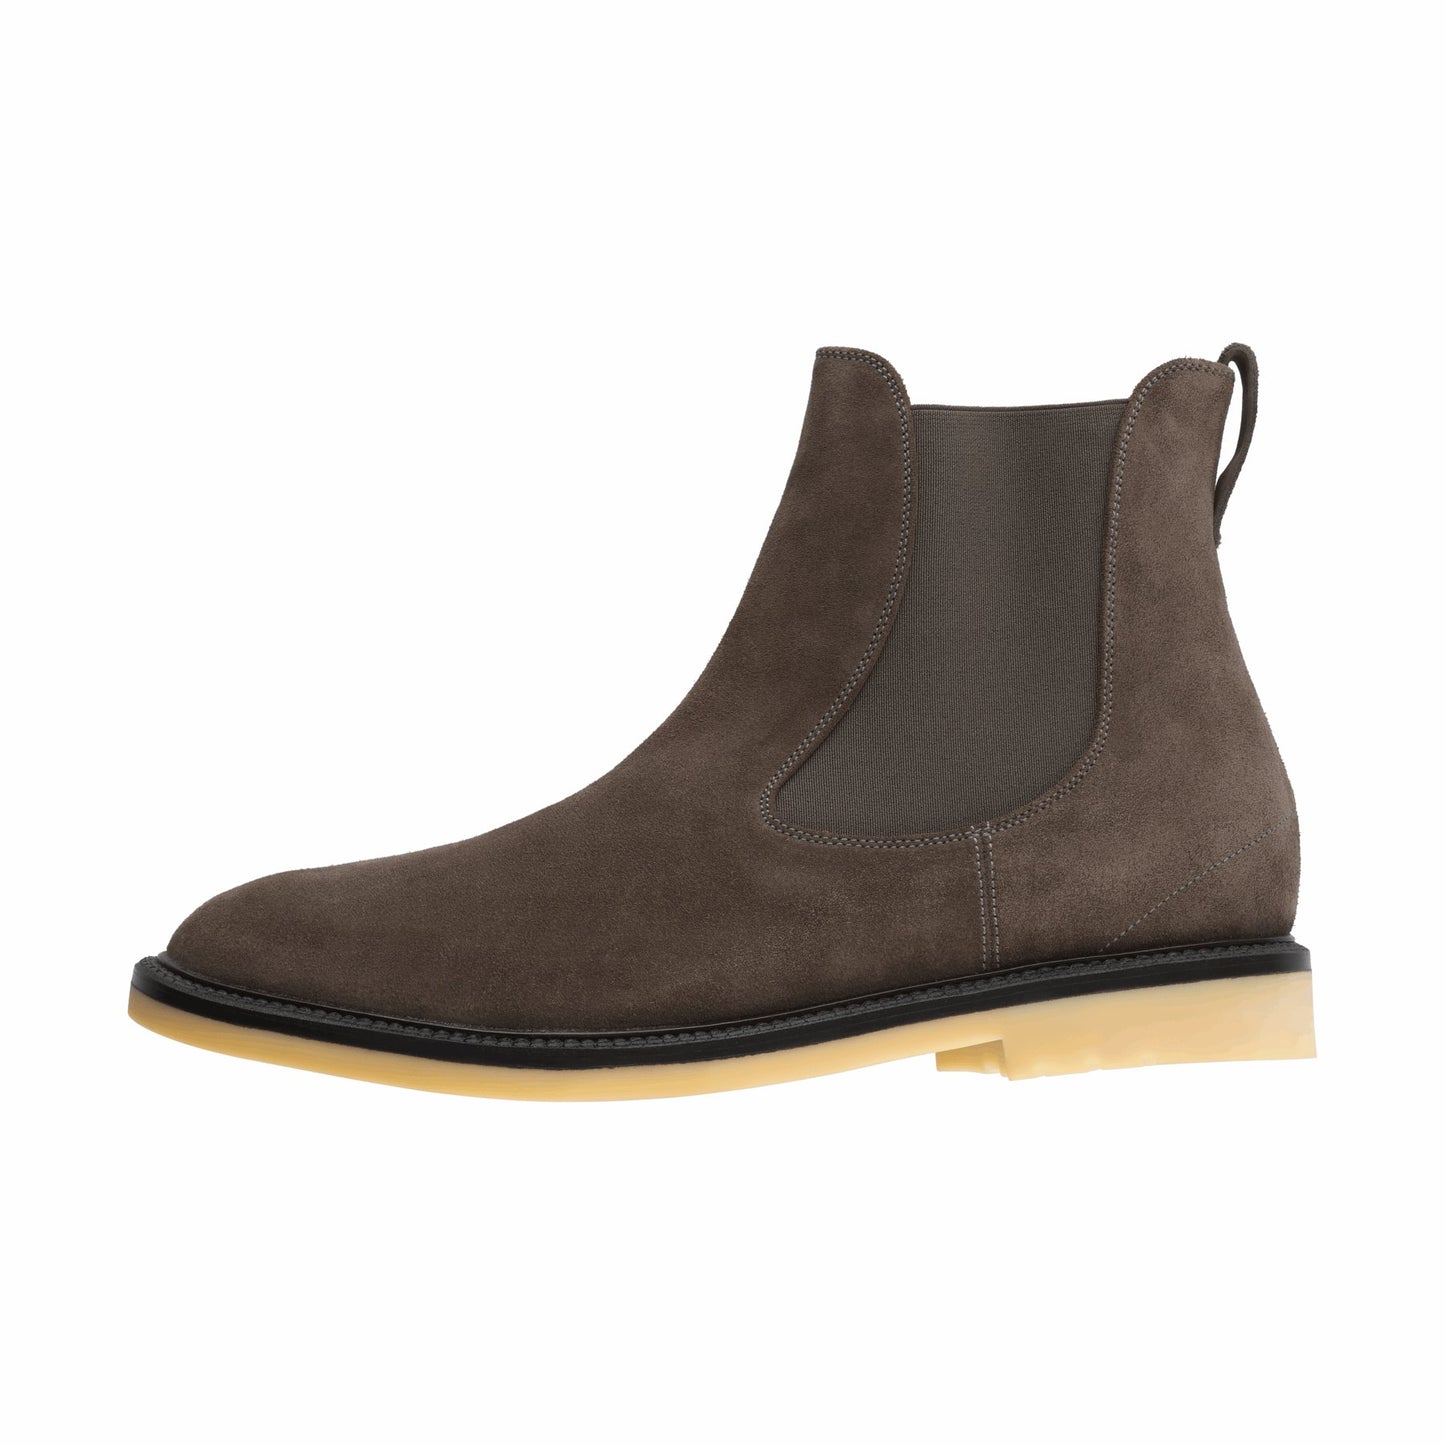 Loro Piana Beatle Walk Suede Chelsea Boots in Taupe - SARTALE